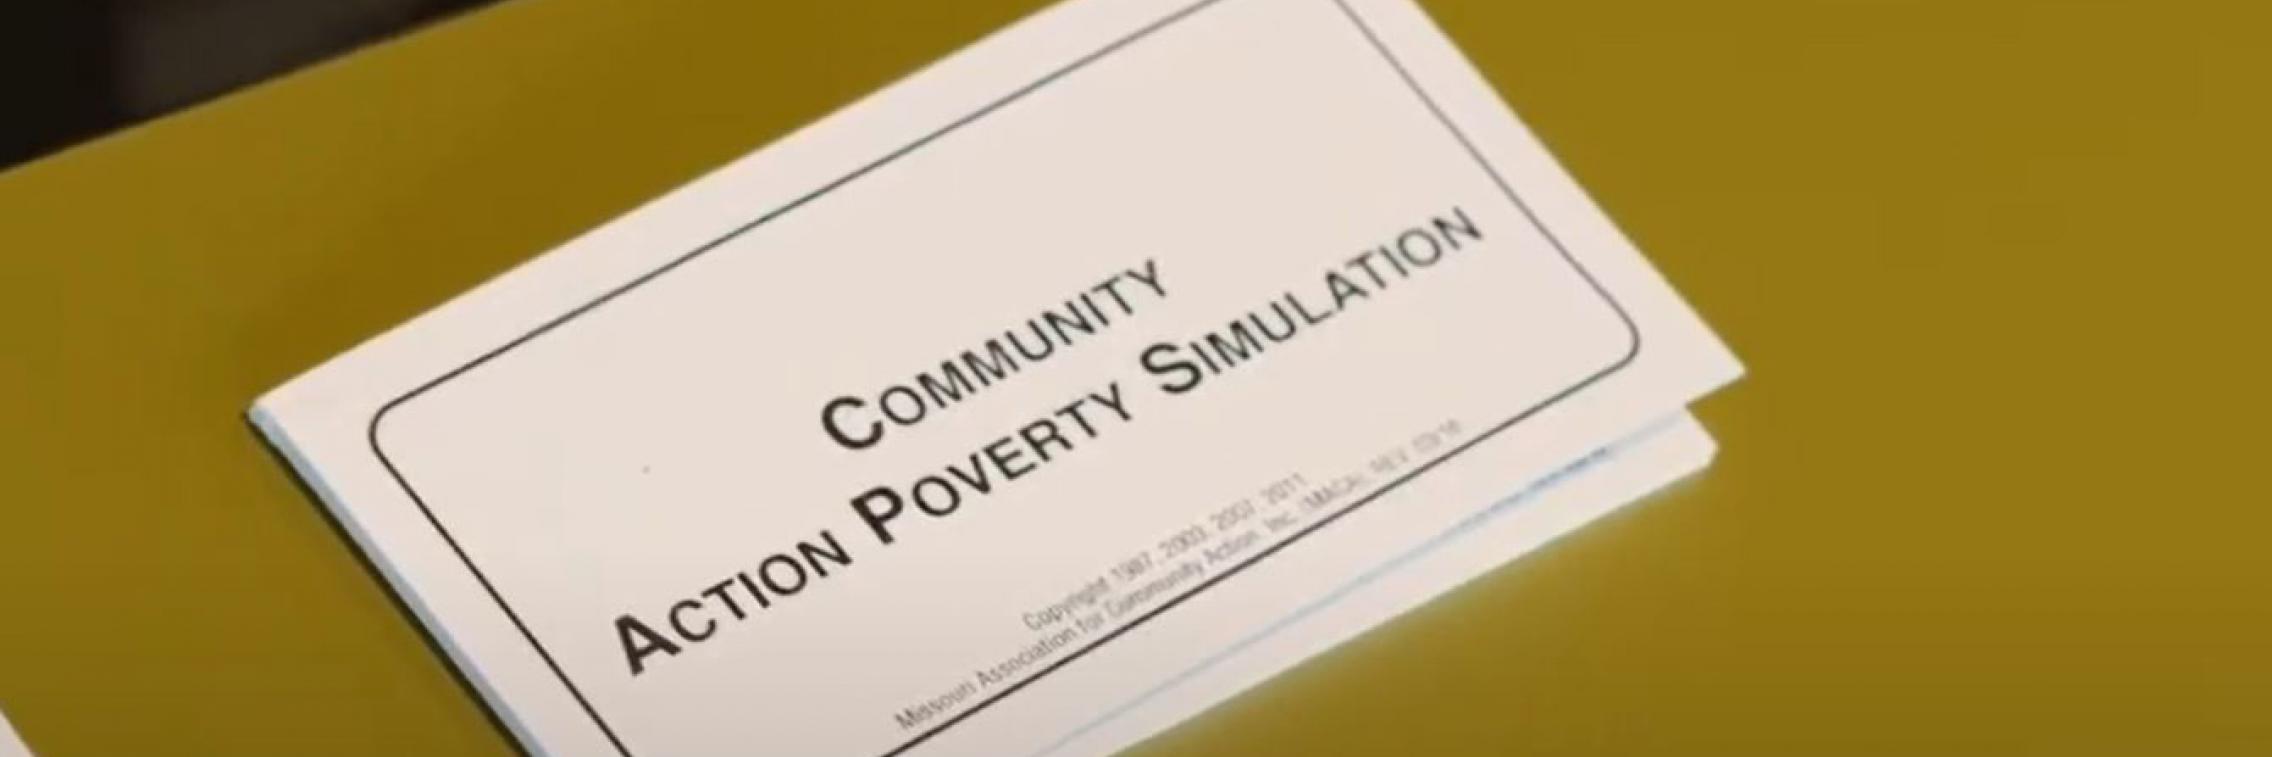 Community Action Poverty Simulation workbook on a table